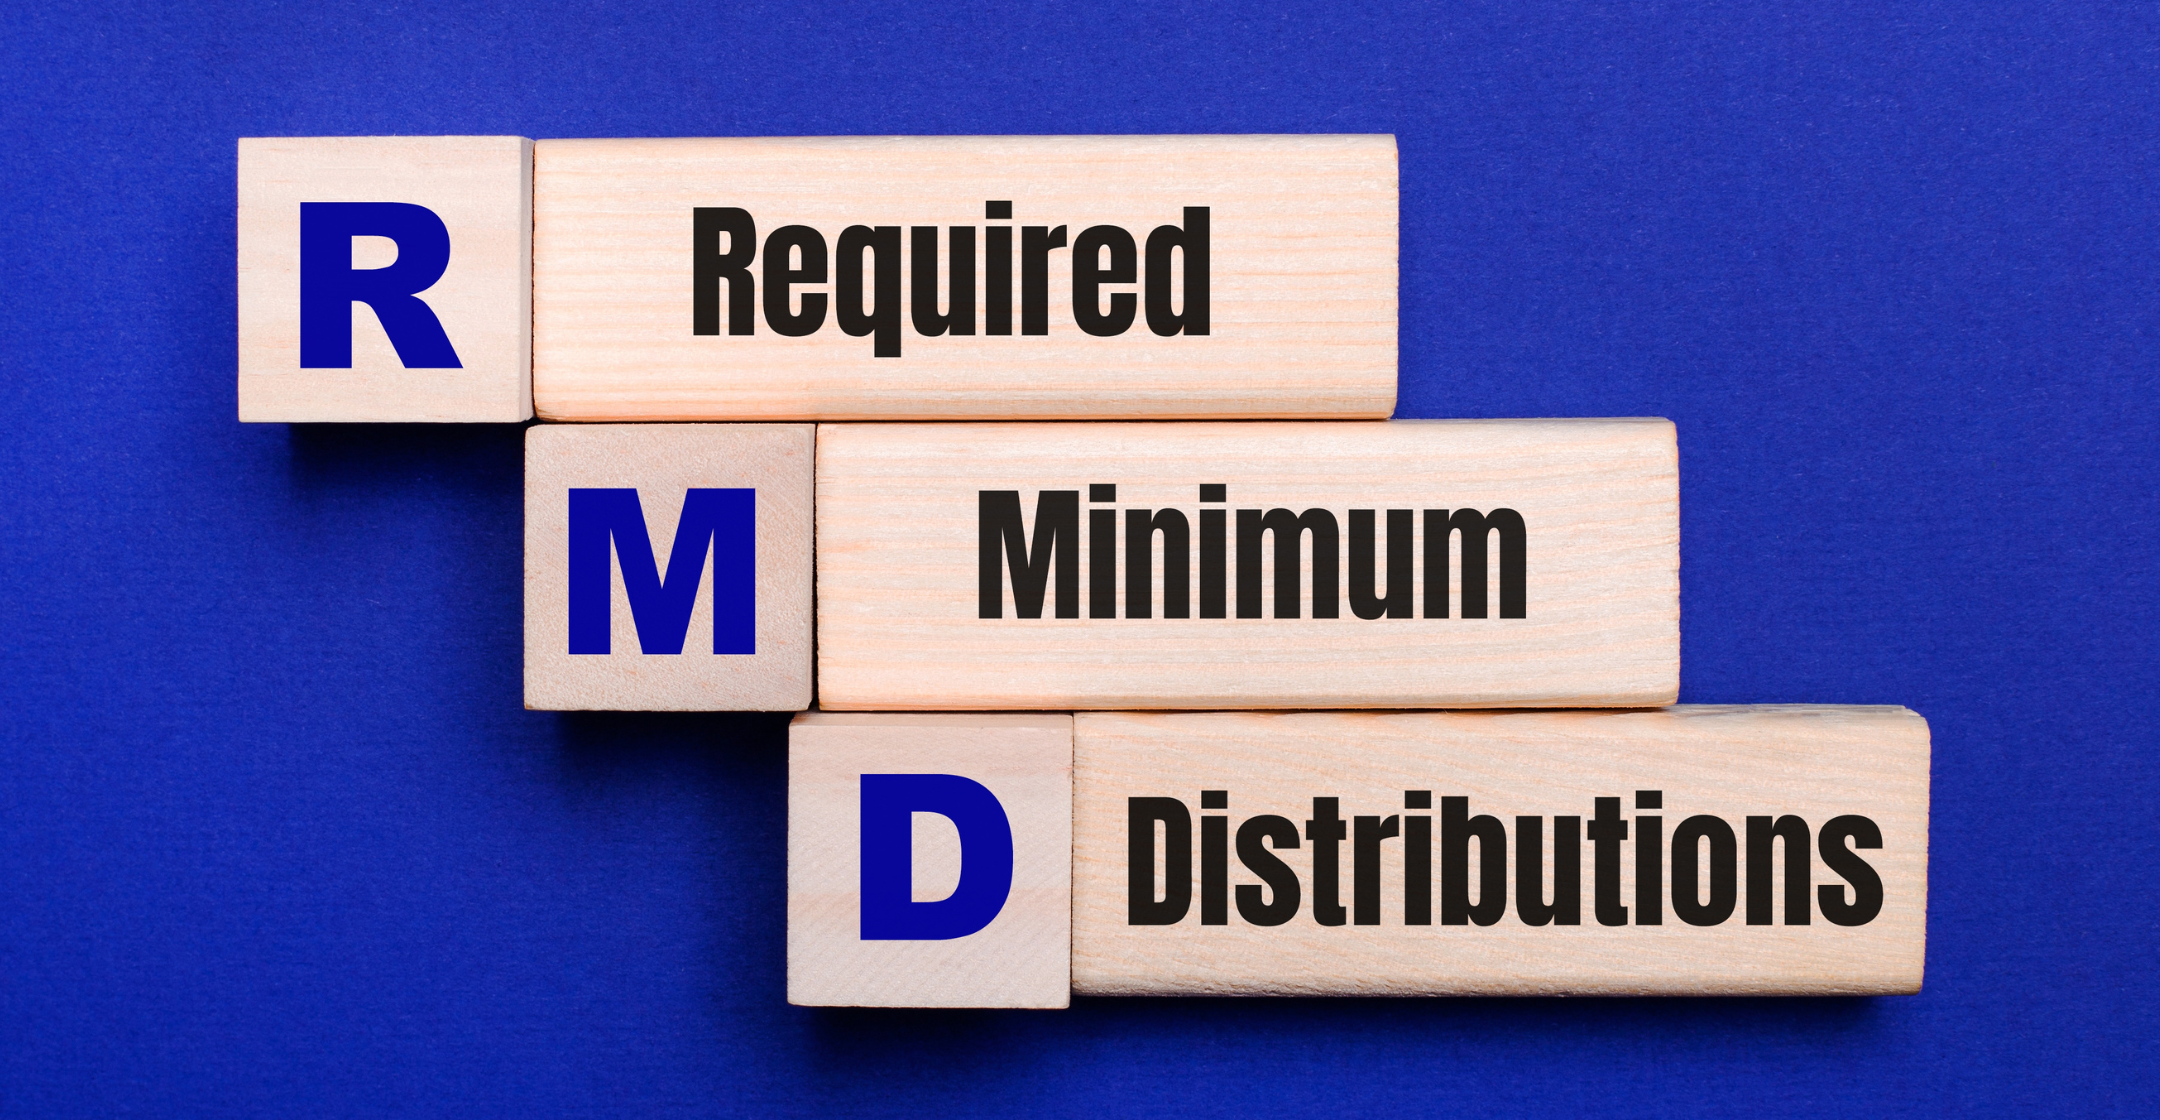 What is an RMD?